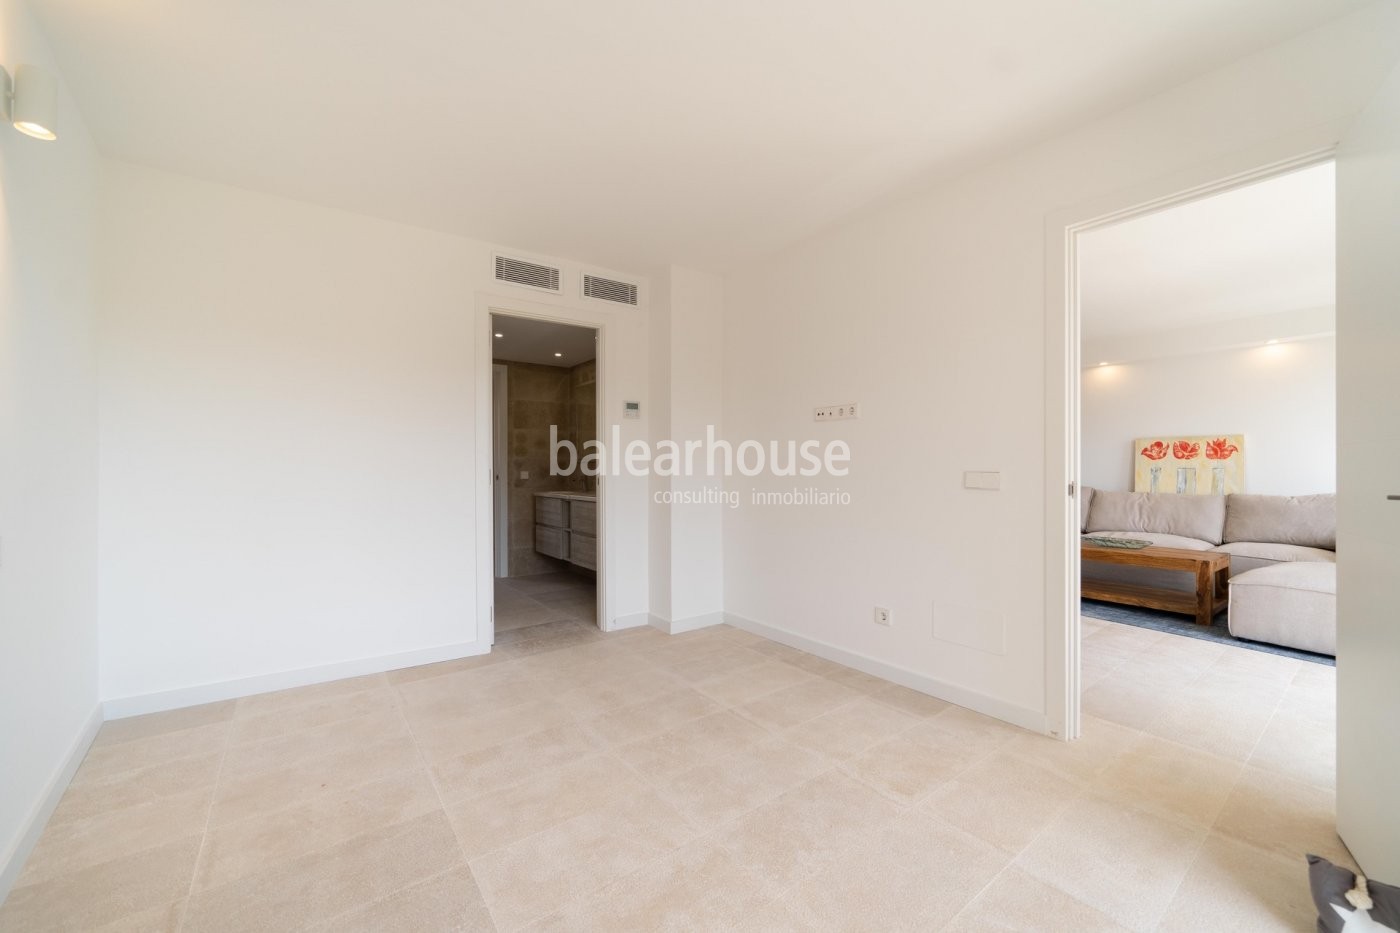 Beautifully renovated apartment full of natural light and style in an outstanding Palma location.